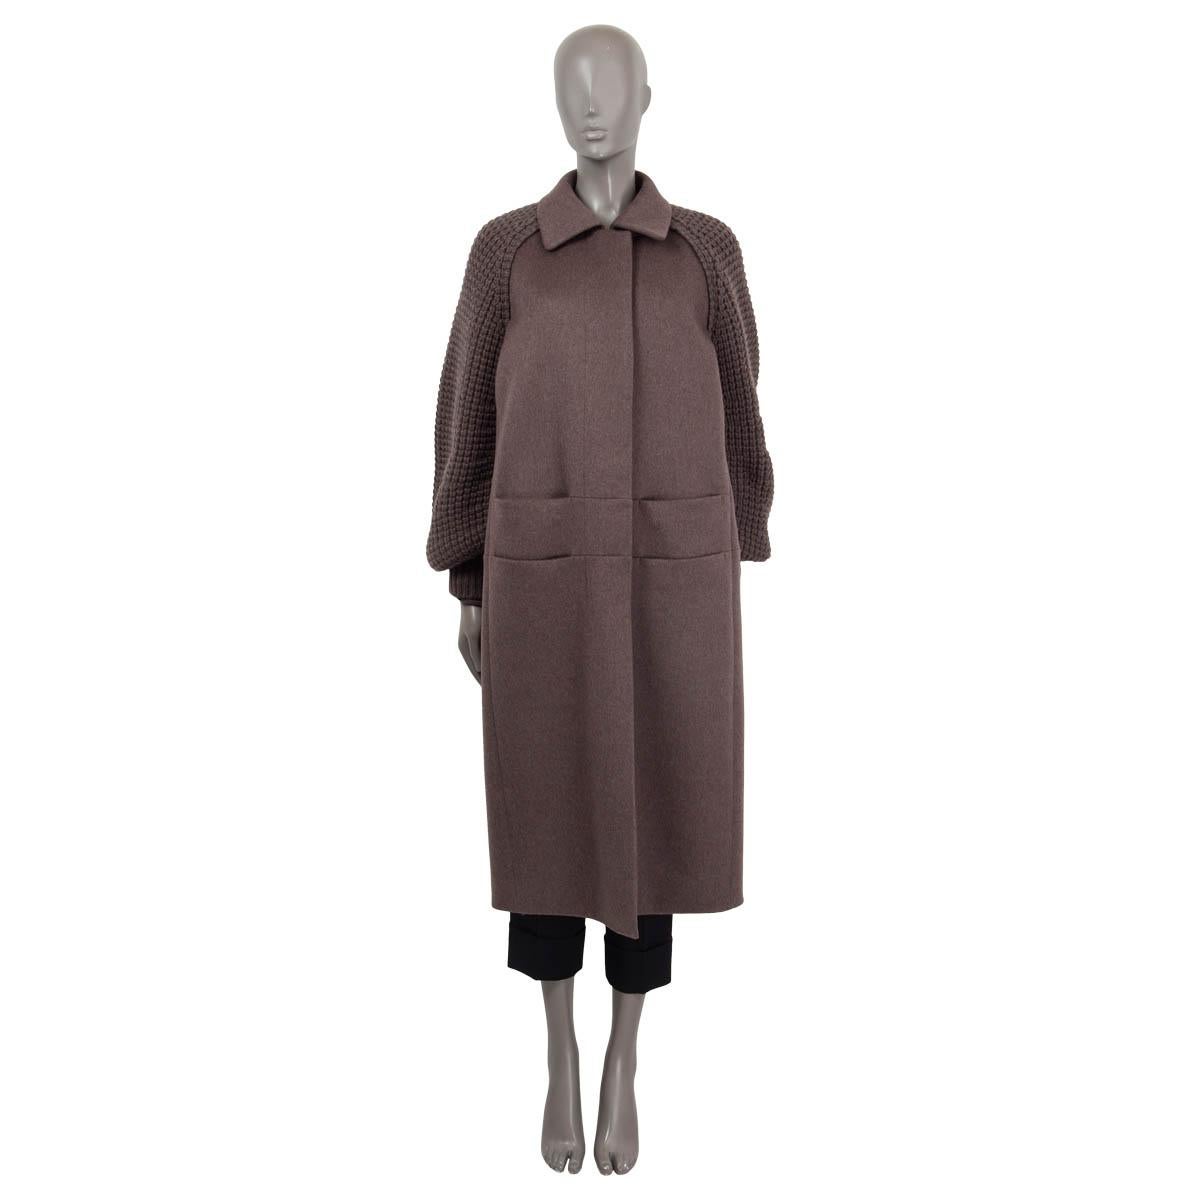 100% authentic Akris Marabella coat in sepia cashmere (100%). Features long chunky knit raglan sleeves (sleeve measurements taken from the neck) and four slit pockets on the front. Opens with concealed buttons on the front. Semi lined in sepia silk